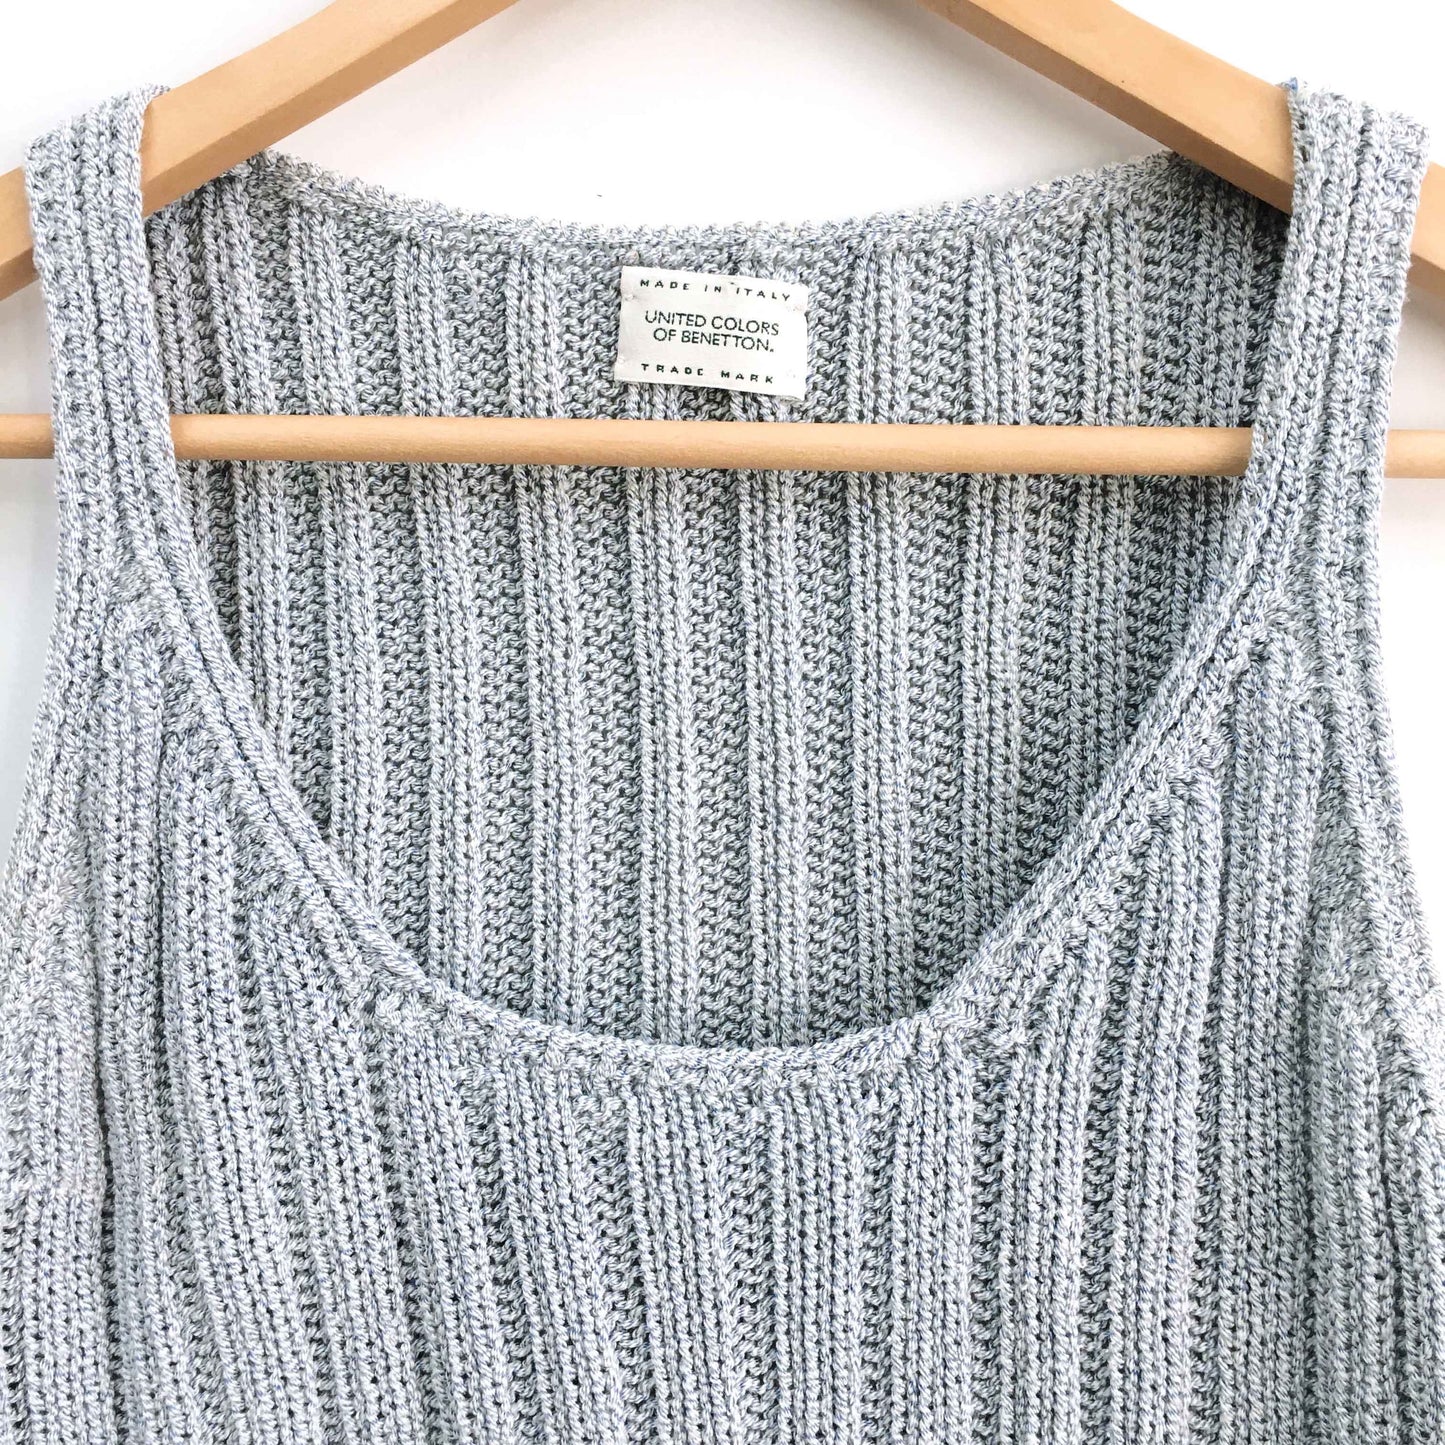 United Colors of Benetton crop knit - size xs